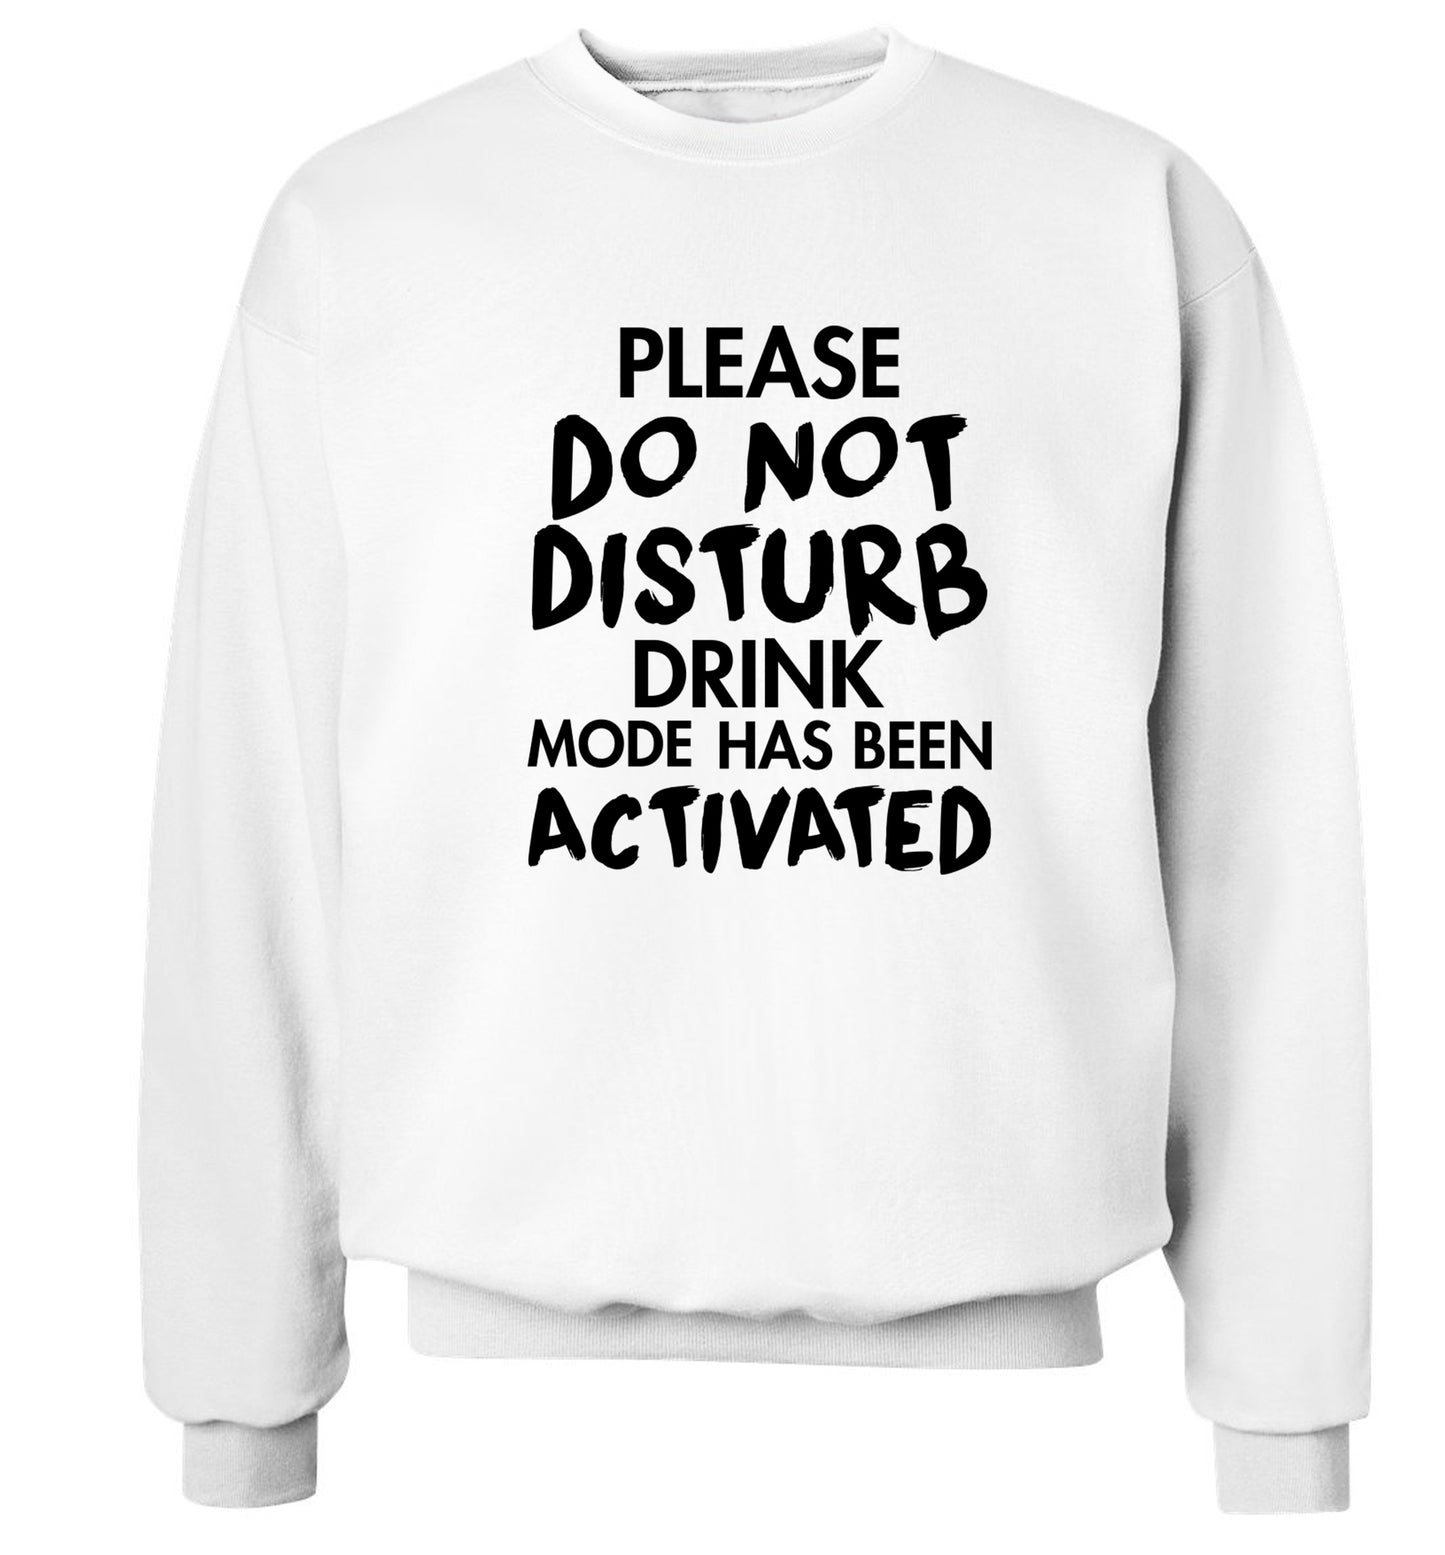 Please do not disturb drink mode has been activated Adult's unisex white Sweater 2XL